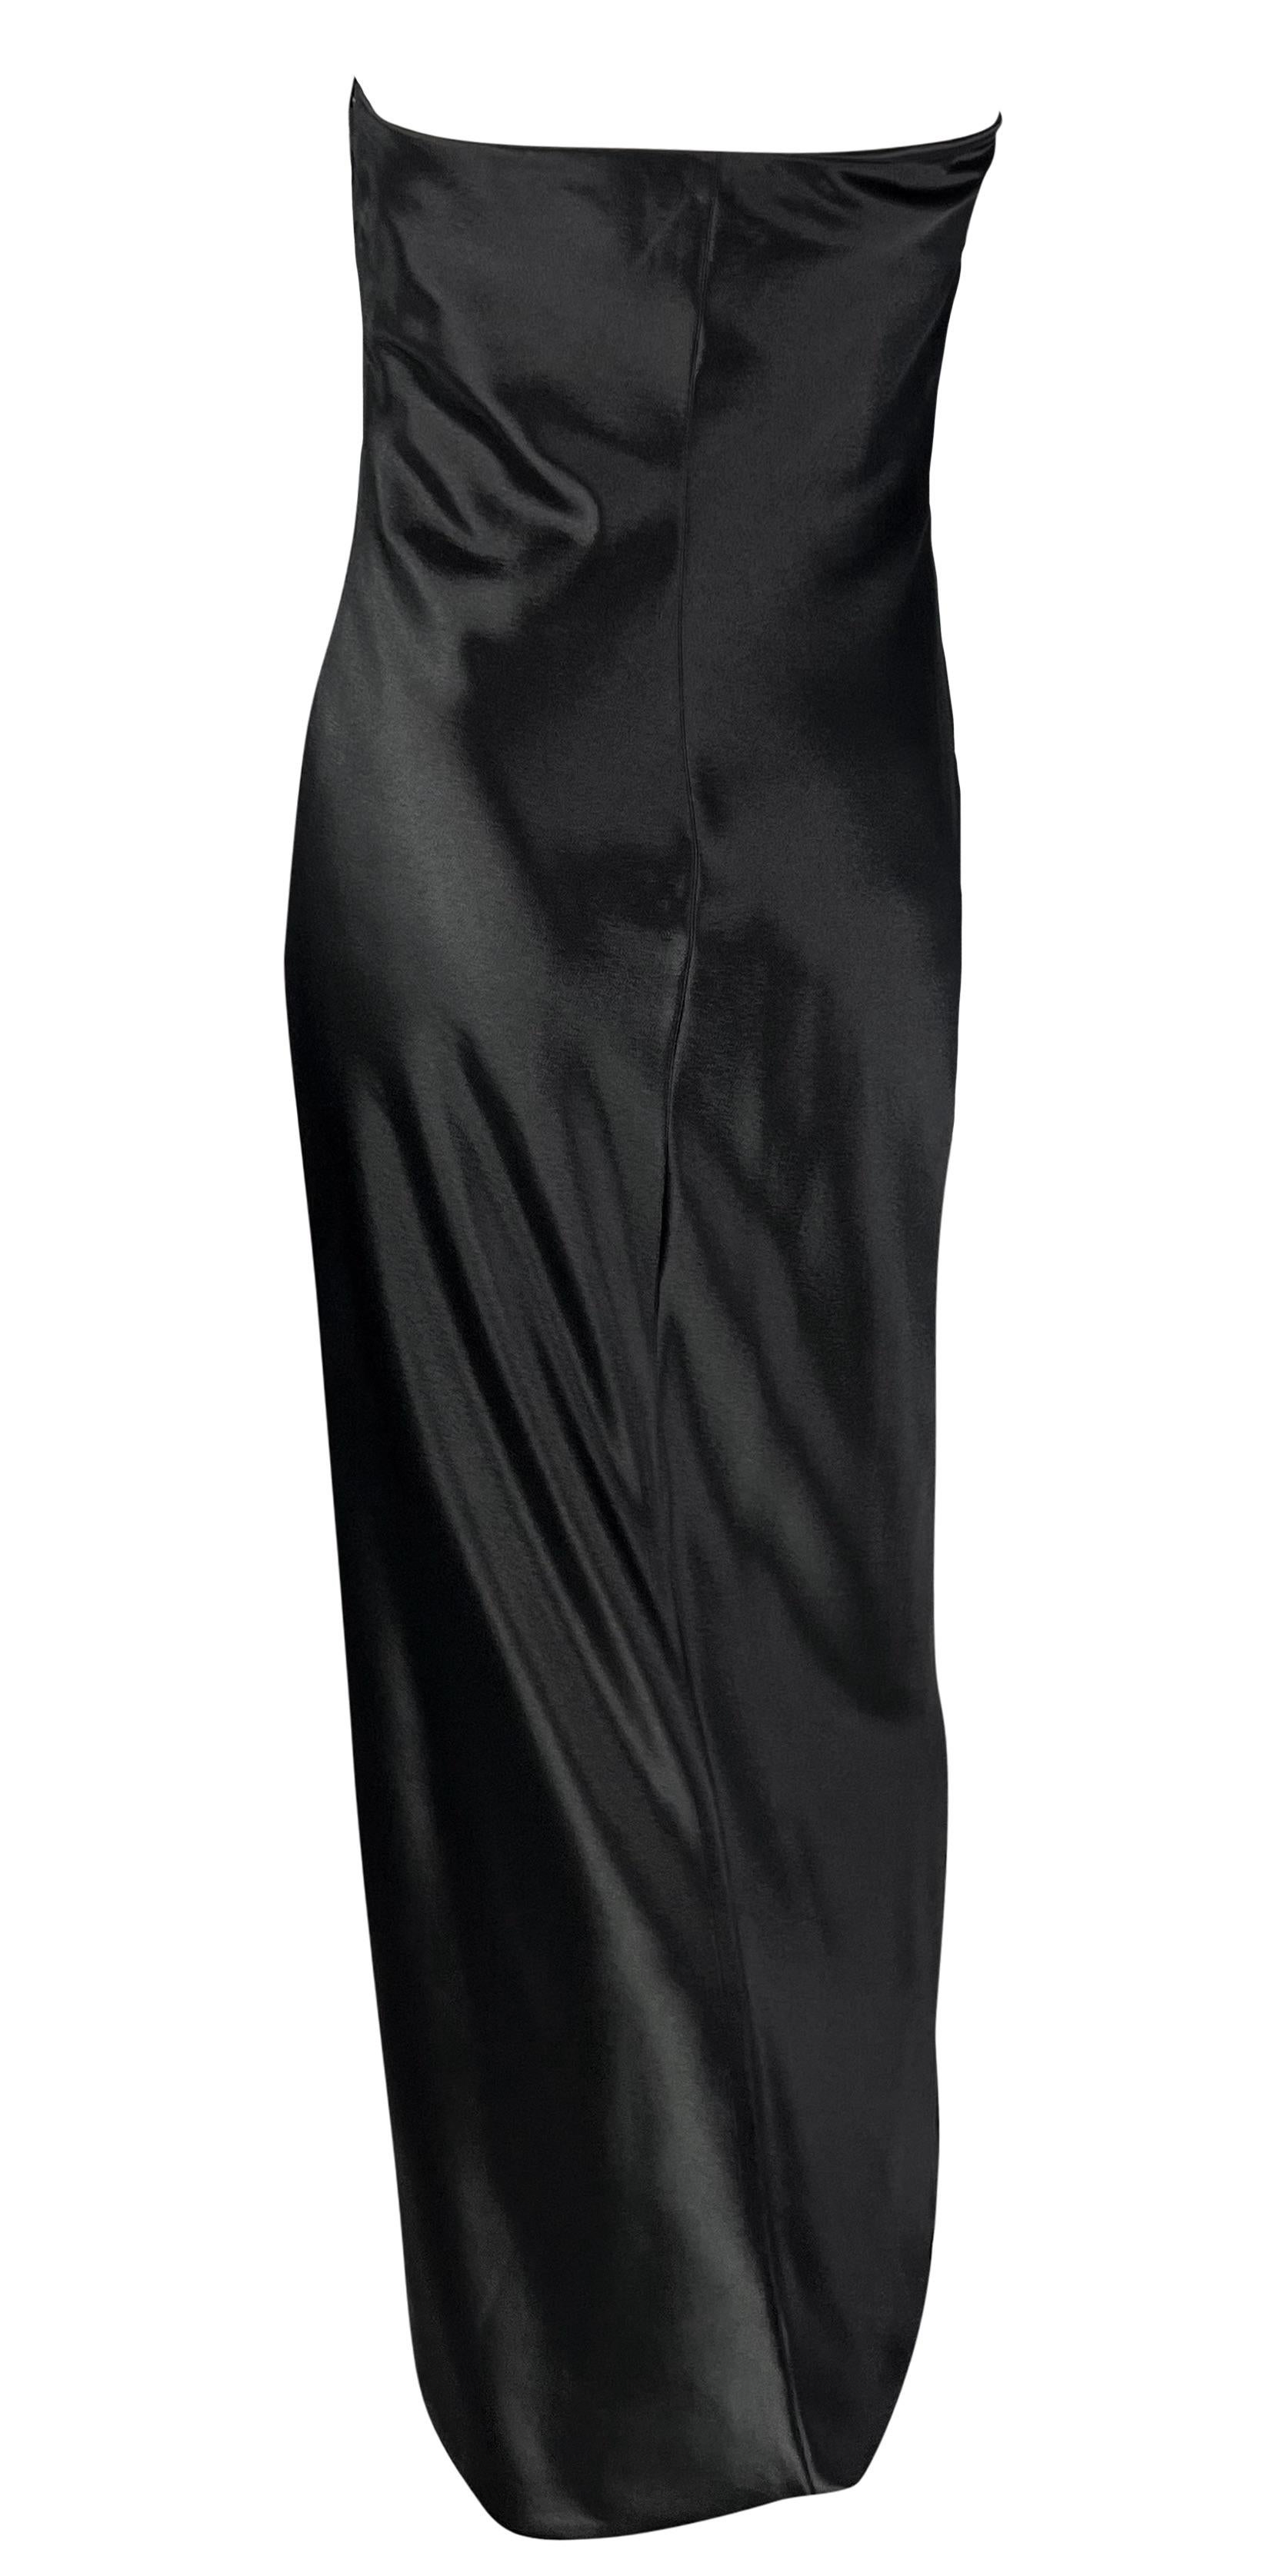 F/W 1997 Gianni Versace Strapless Satin Tie-Front Black Gown For Sale 3